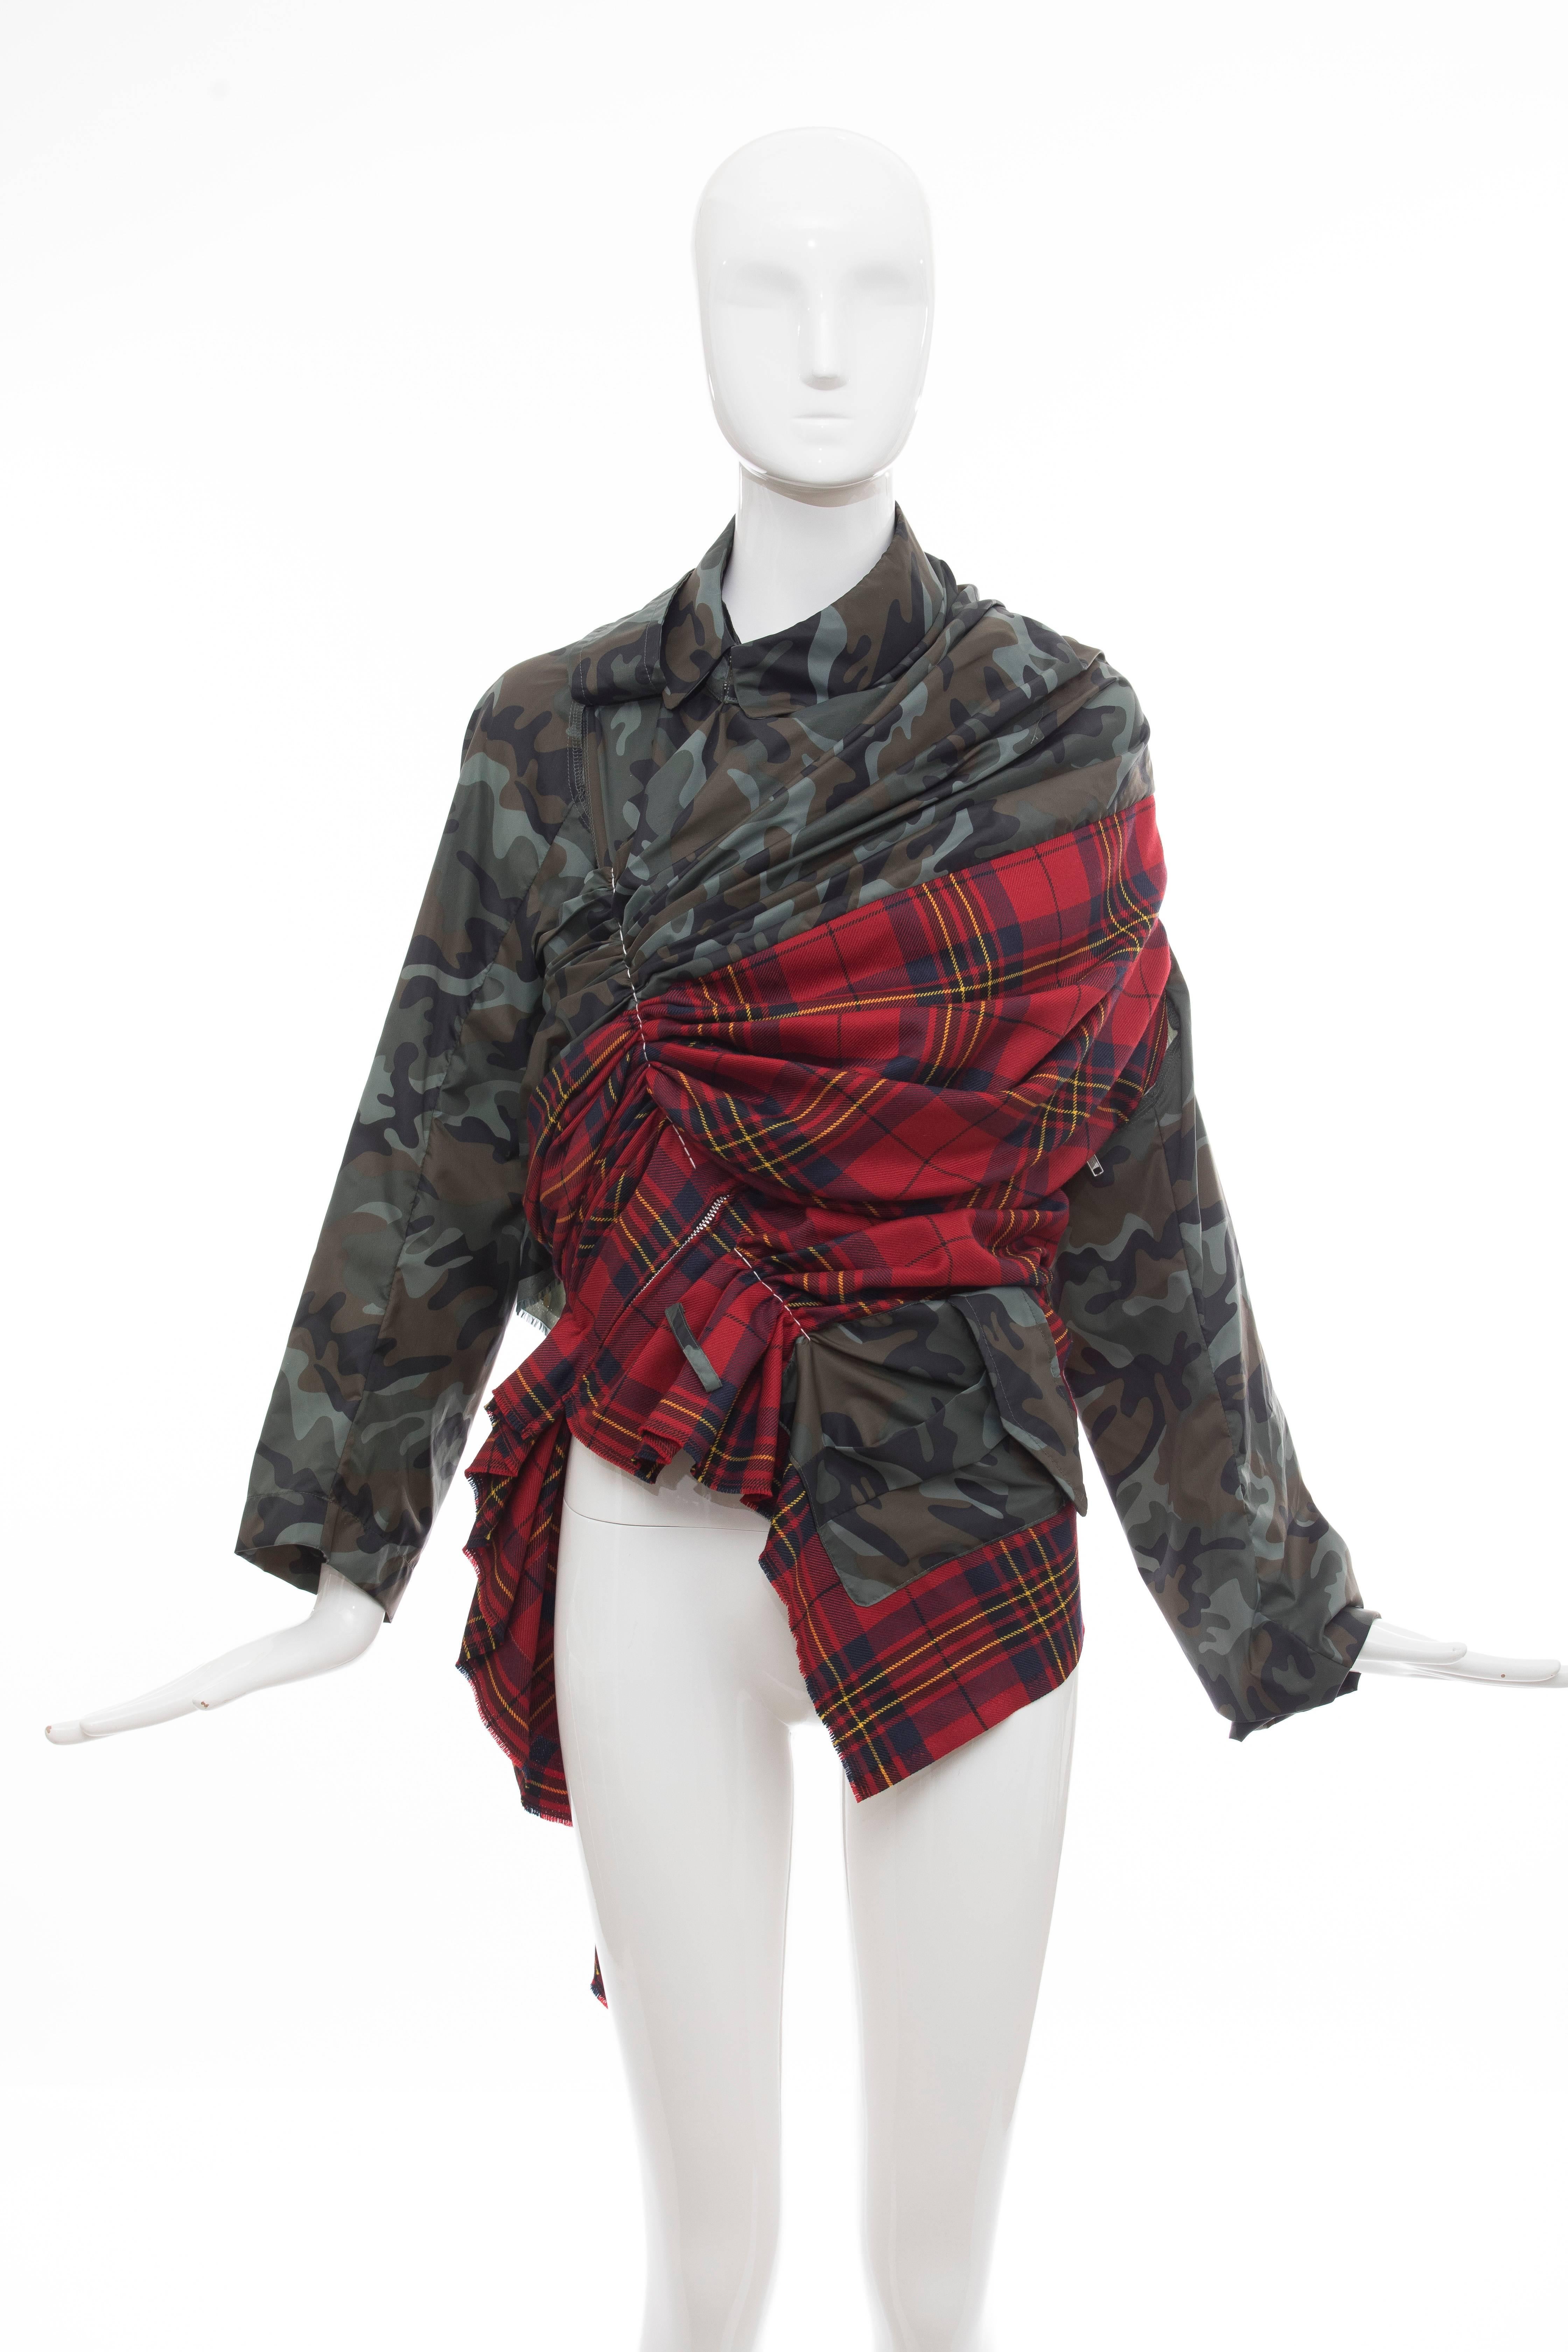 Comme des Garçons, Spring-Summer 2006 asymmetrical jacket with nylon camouflage and wool tartan plaid pattern throughout and gathered at front featuring concealed zip closure.

Japan: Small

Bust: 36, Waist 32, Shoulder 13, Length 28, Sleeve 32
